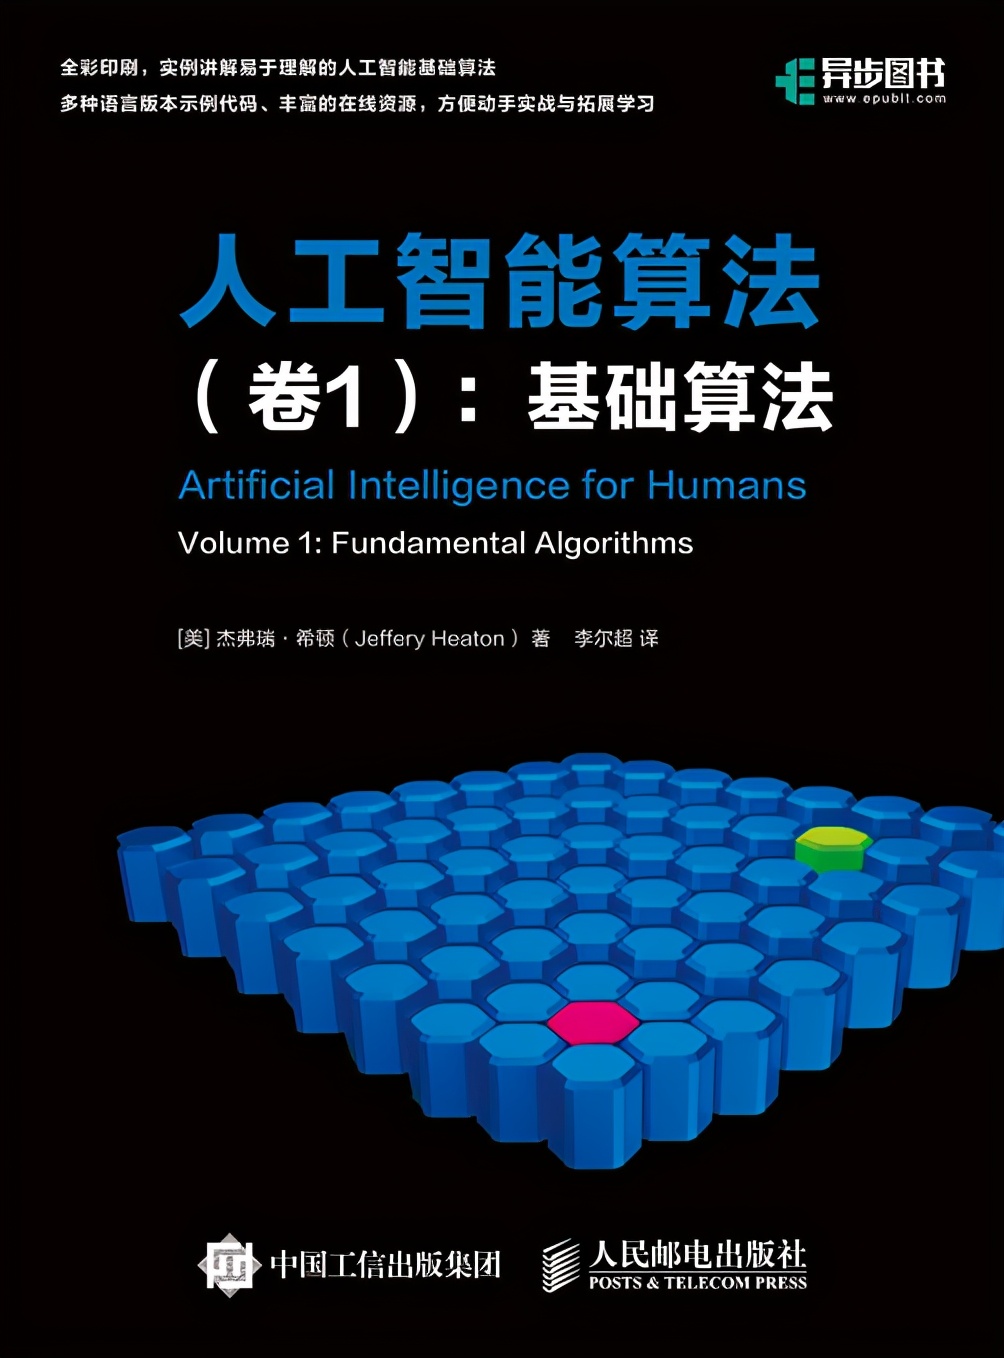 This set of artificial intelligence algorithm books has been published in 3 volumes, volume 3 deep learning and neural networks are on the new book list